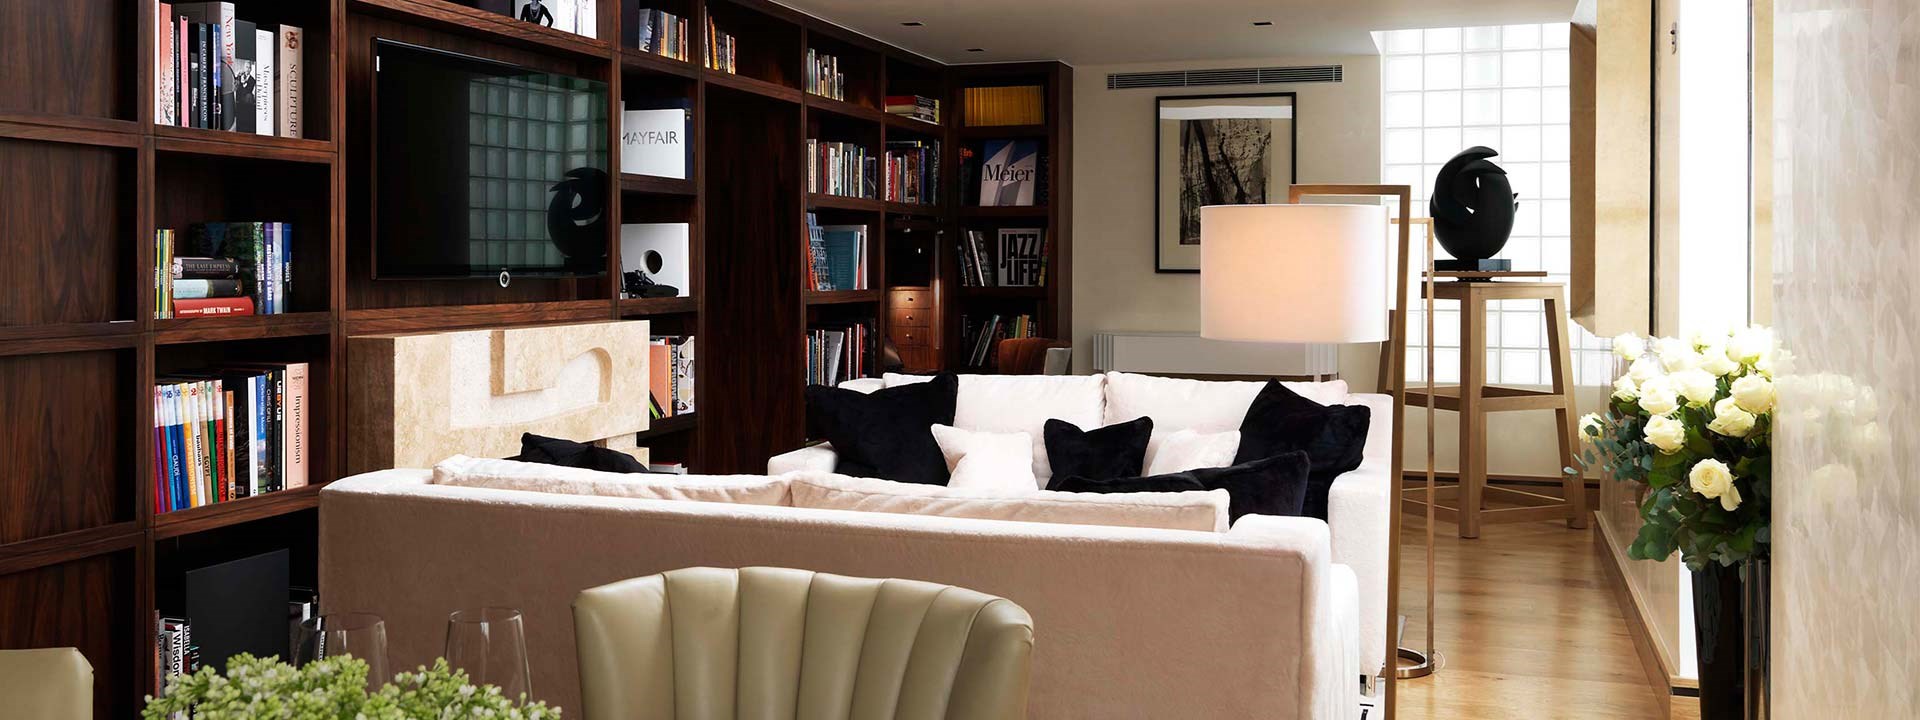 The Library Suite at The Connaught - Lounge view with couches and library with books and TV.